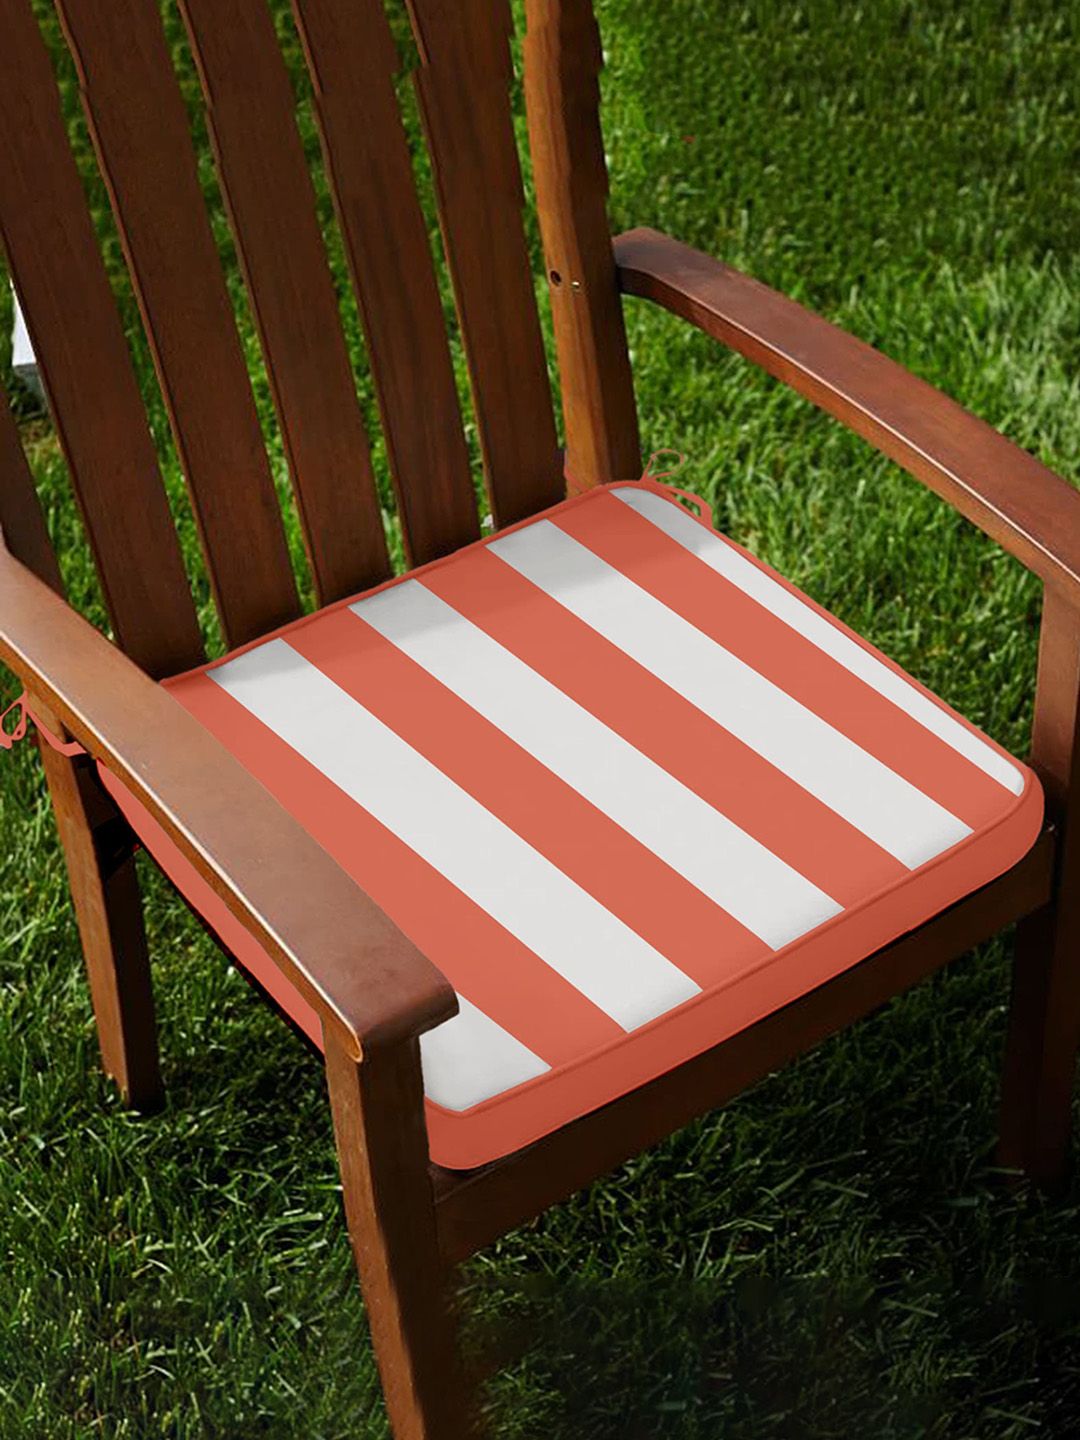 Lushomes Red Wood Striped Square Foam Chair pad with Top Zipper Price in India